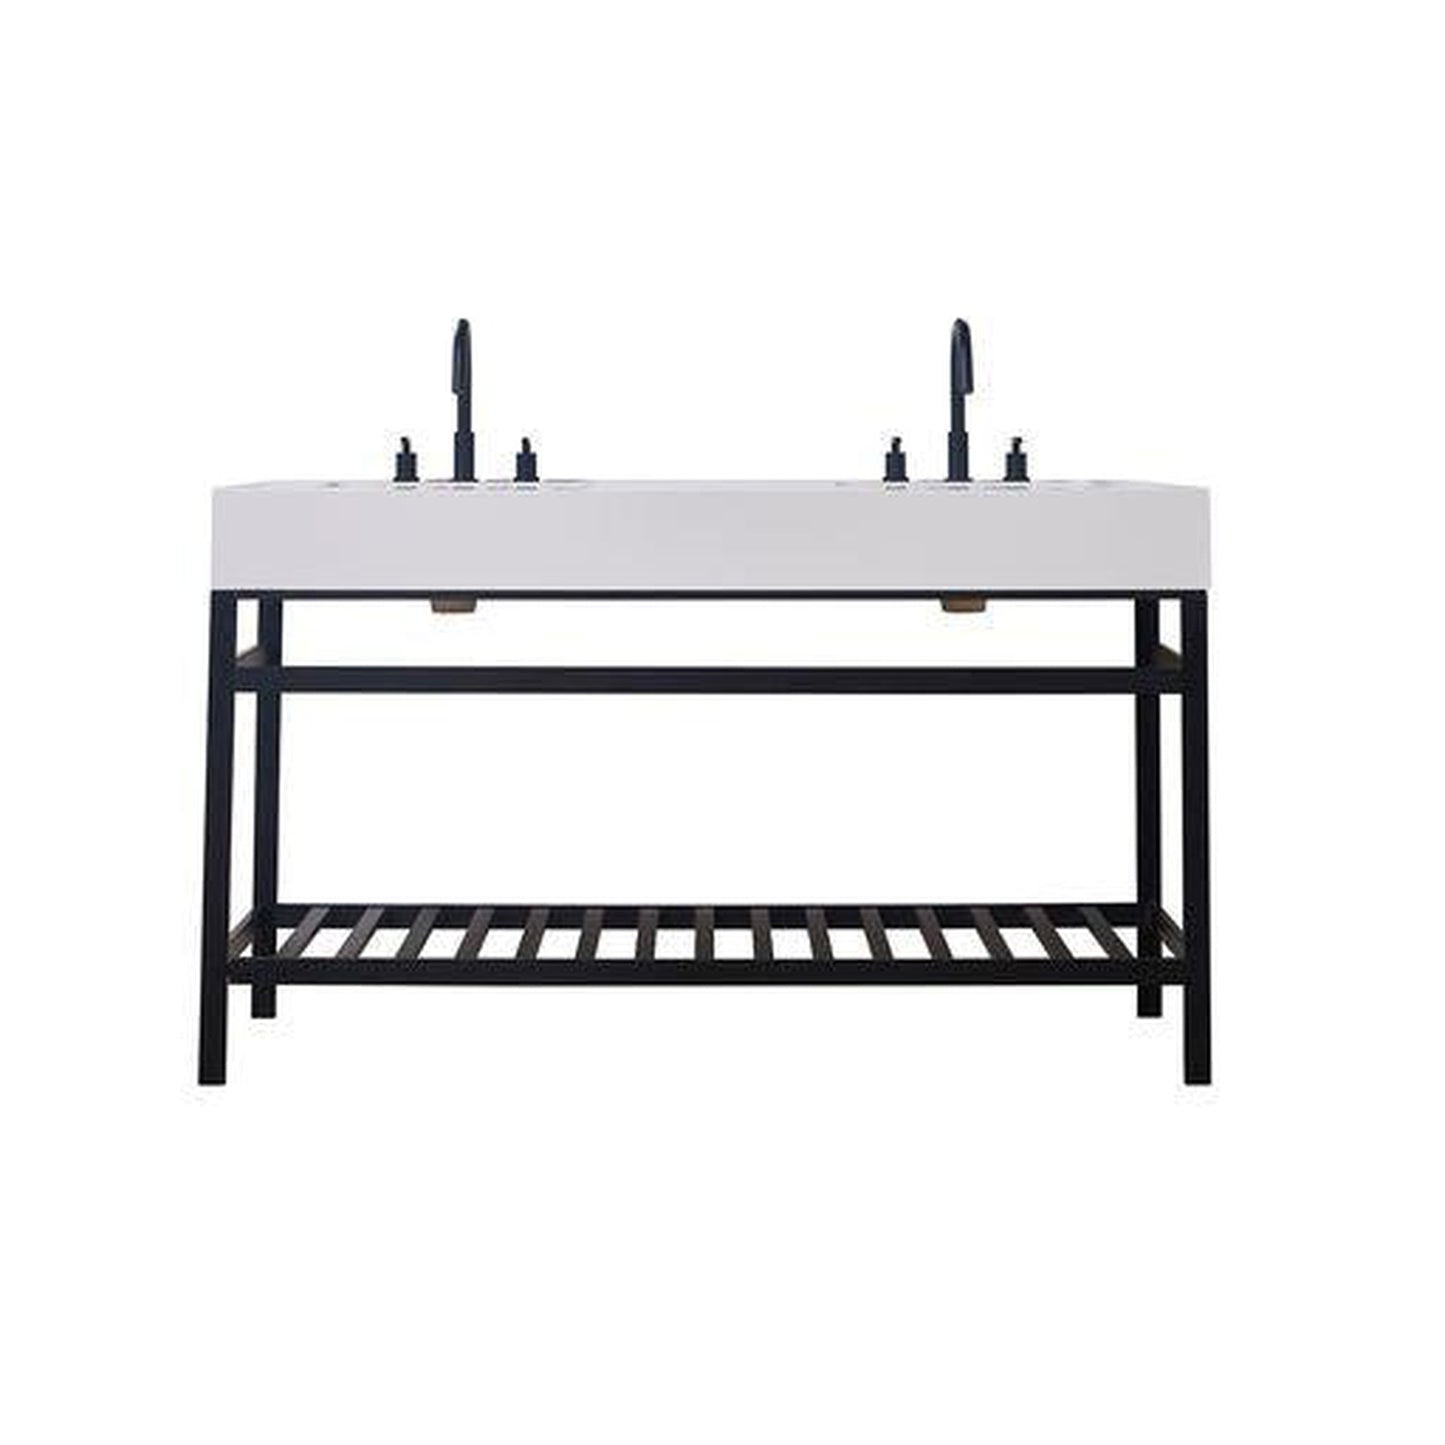 Altair Edolo 60" Matte Black Double Stainless Steel Bathroom Vanity Set Console With Snow White Stone Top, Two Rectangular Undermount Ceramic Sinks, and Safety Overflow Hole